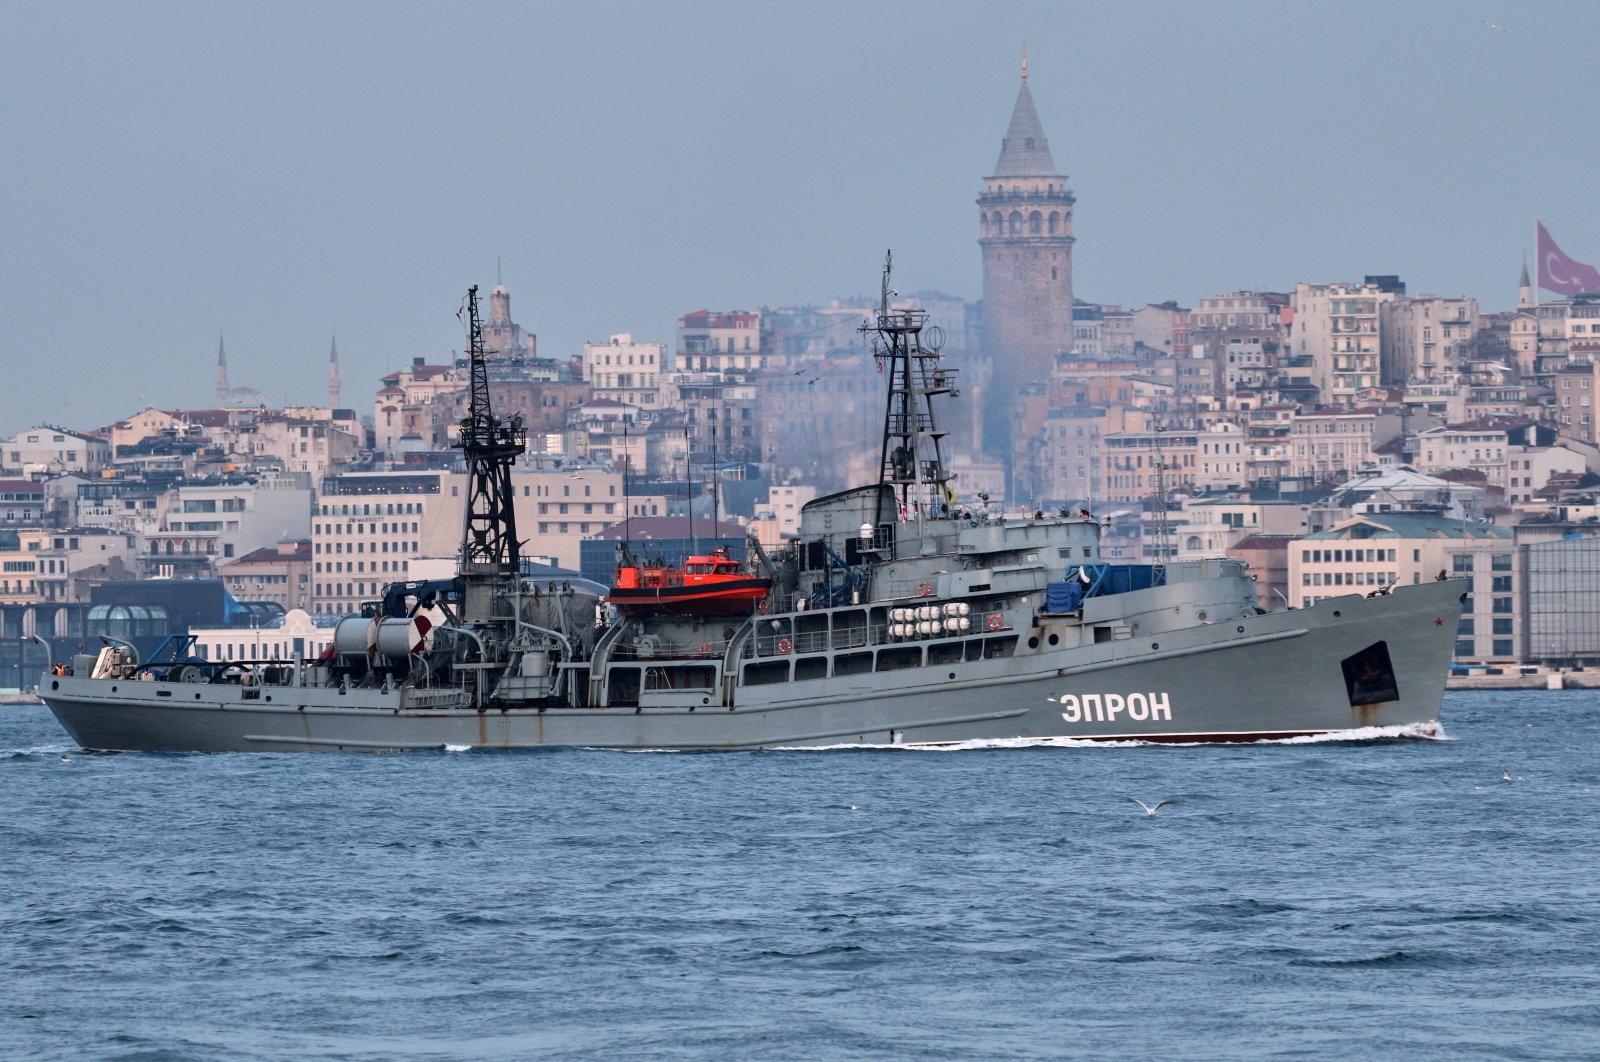 The Russian Navy&#039;s Black Sea Fleet 145th Rescue Ship Squad&#039;s Prut class rescue tug EPRON sails in the Bosporus, on its way to the Black Sea, in Istanbul, Turkey, Feb. 17, 2022. (REUTERS)